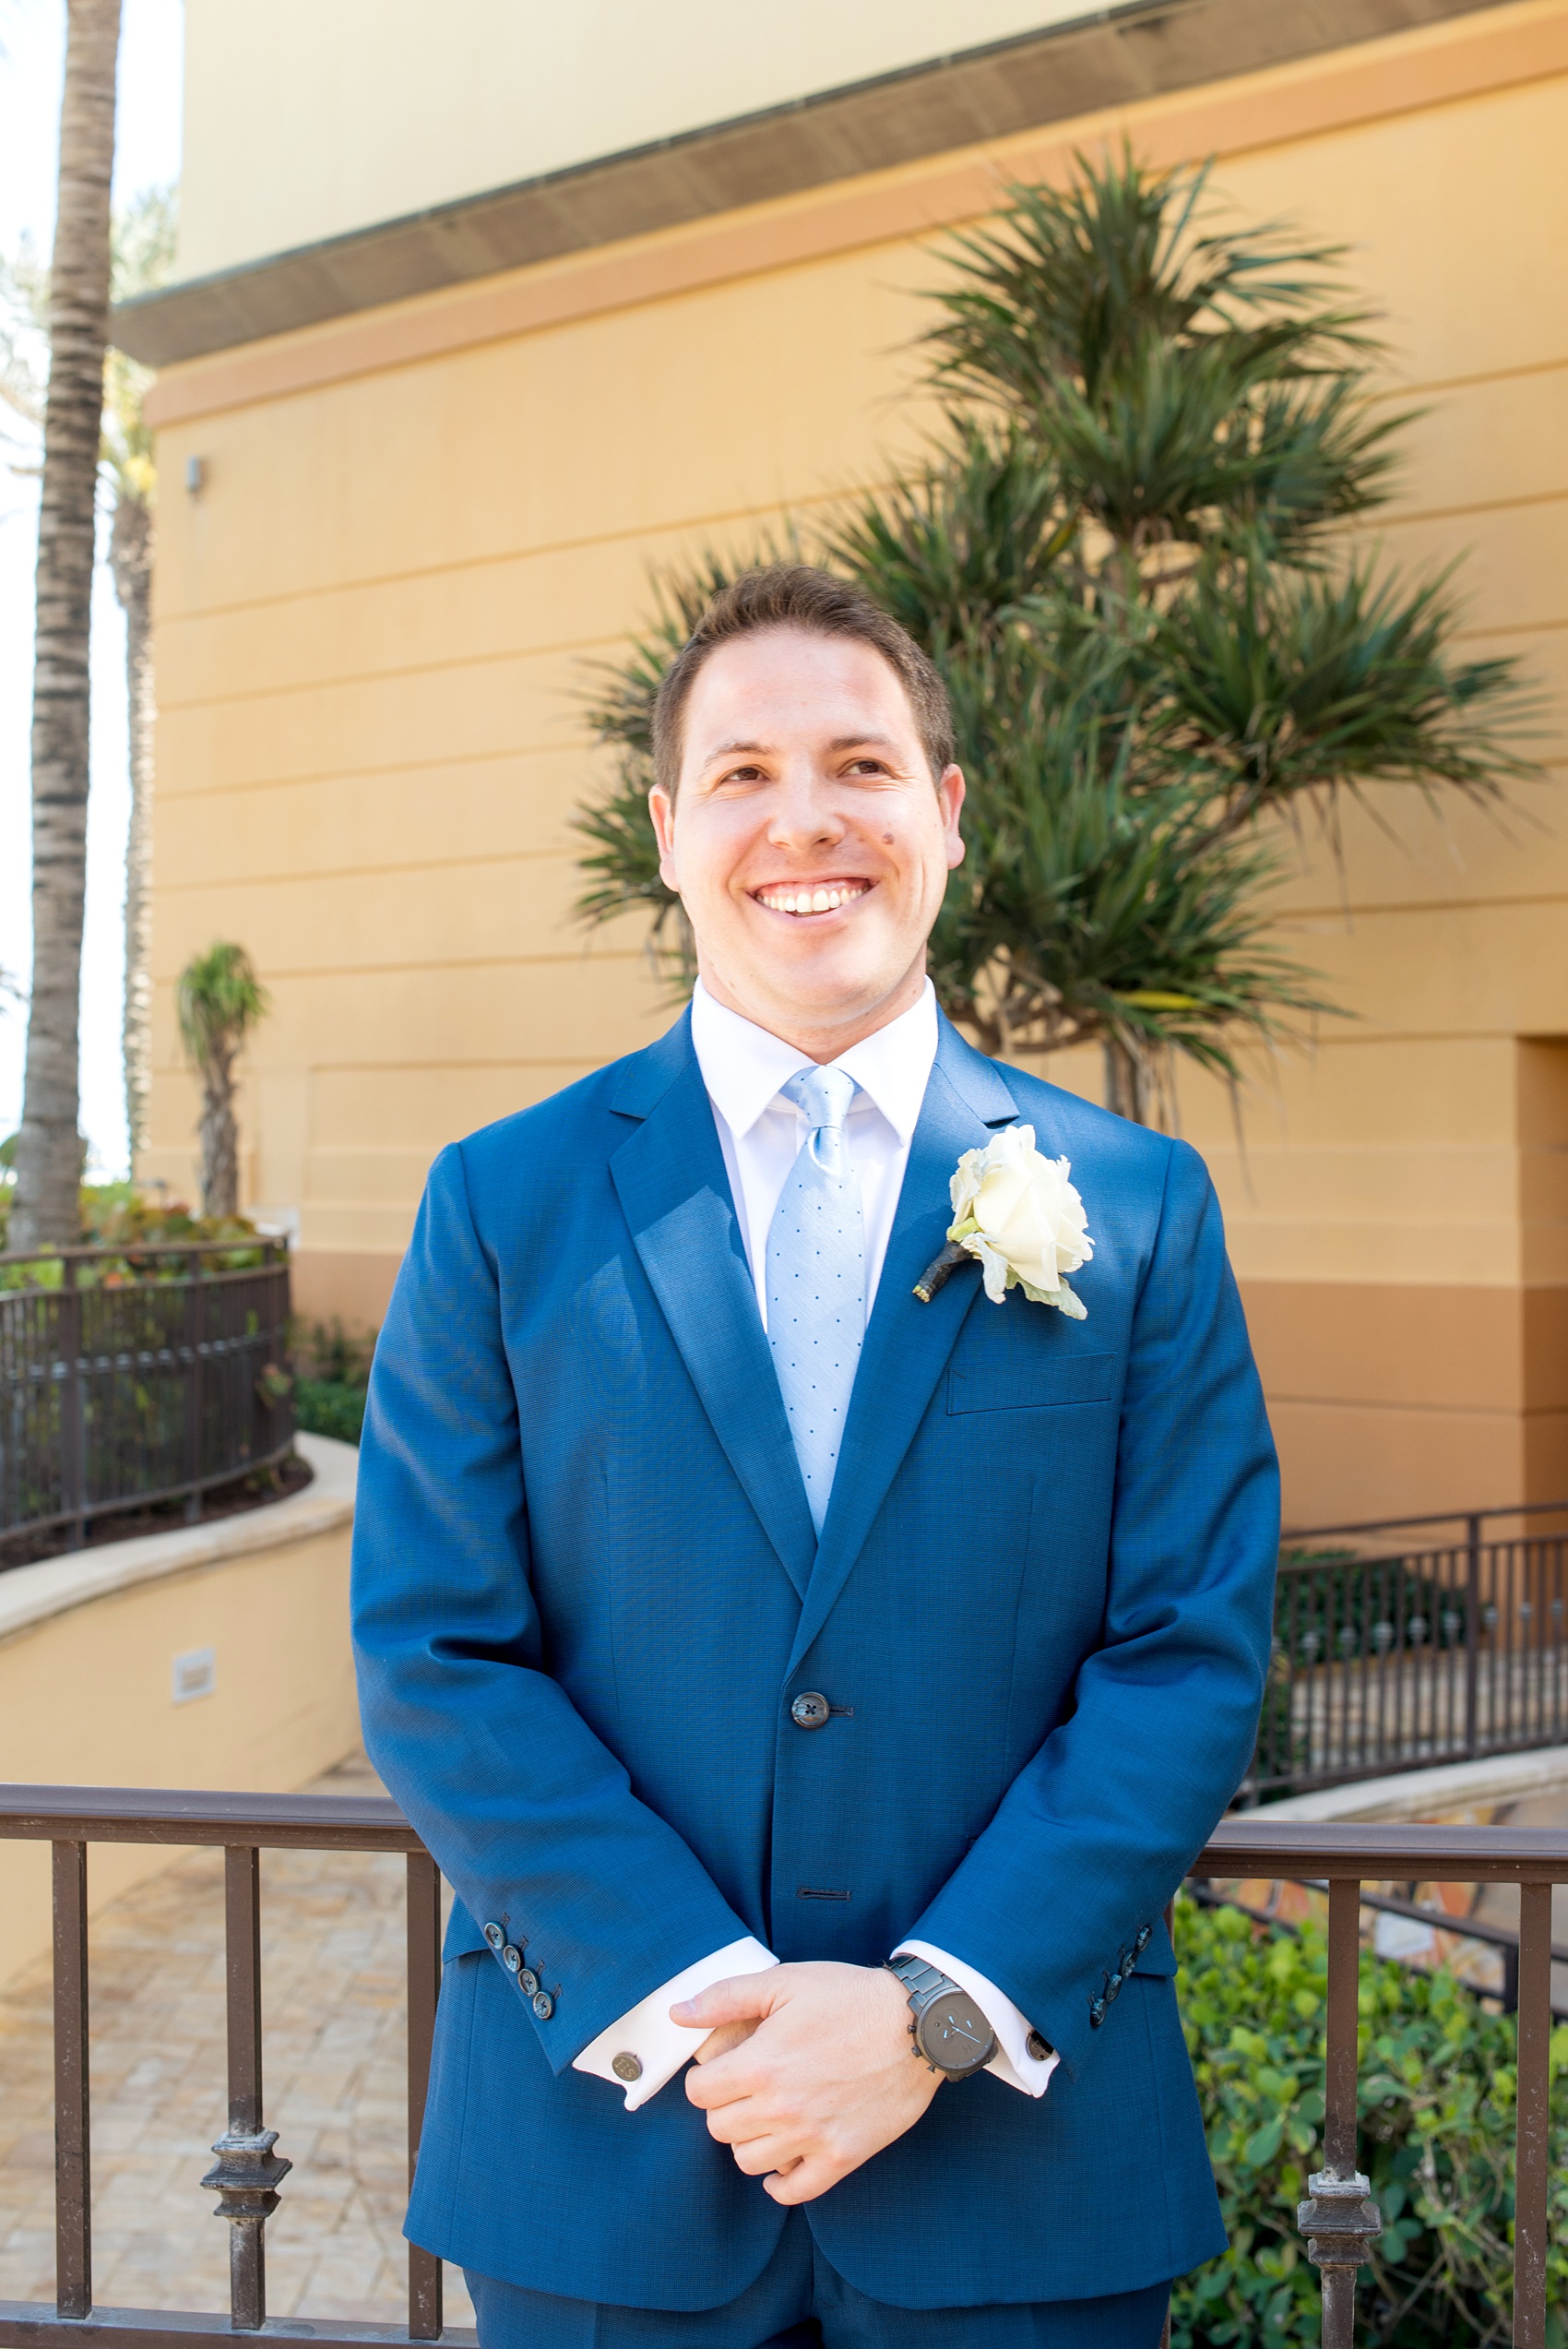 Eau Palm Beach wedding photos by Mikkel Paige Photography. This luxury Florida hotel is a beautiful location for a destination wedding. The groom wore a navy suit with a white rose boutonniere and light blue dot tie. Click through to see more! #WestPalmBeach #EauPalmBeach #BeachWedding #FloridaWeddings